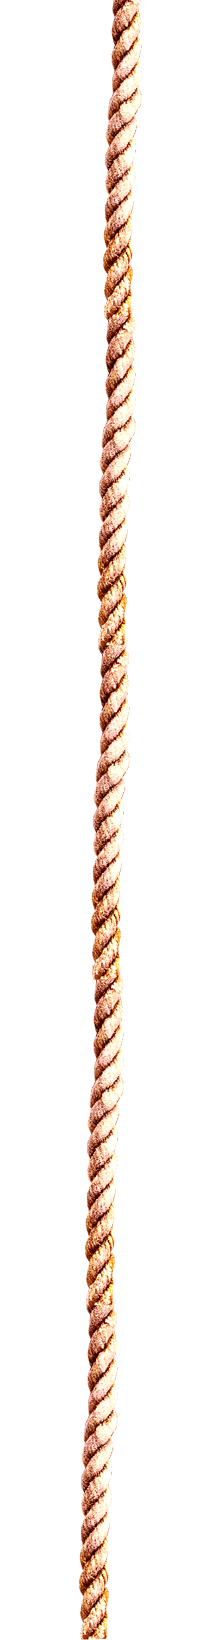 rope png by DIGITALWIDERESOURCE on DeviantArt